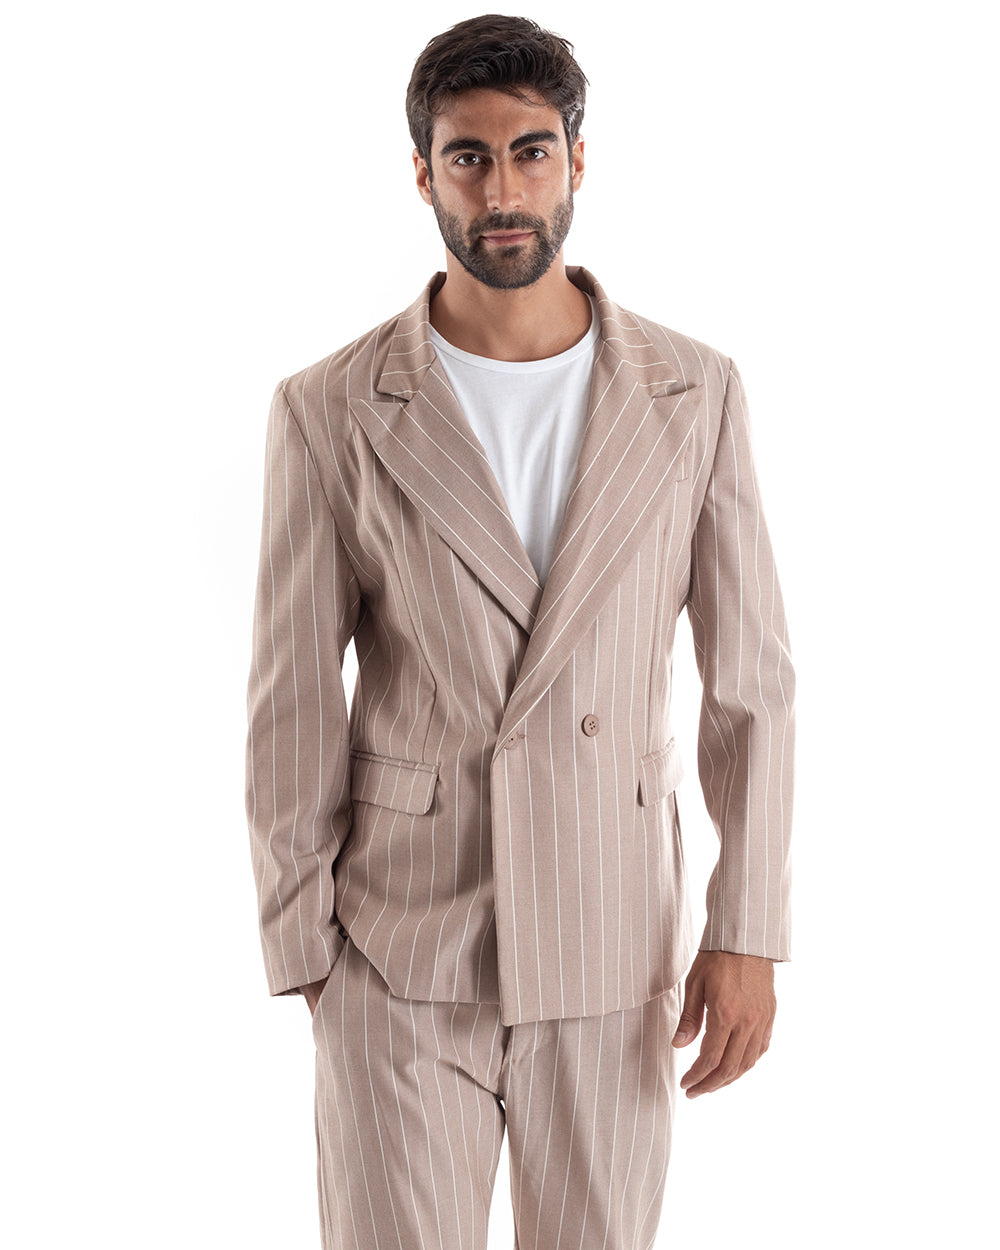 Double-Breasted Men's Suit Viscose Suit Jacket Trousers Camel Elegant Ceremony GIOSAL-OU2155A